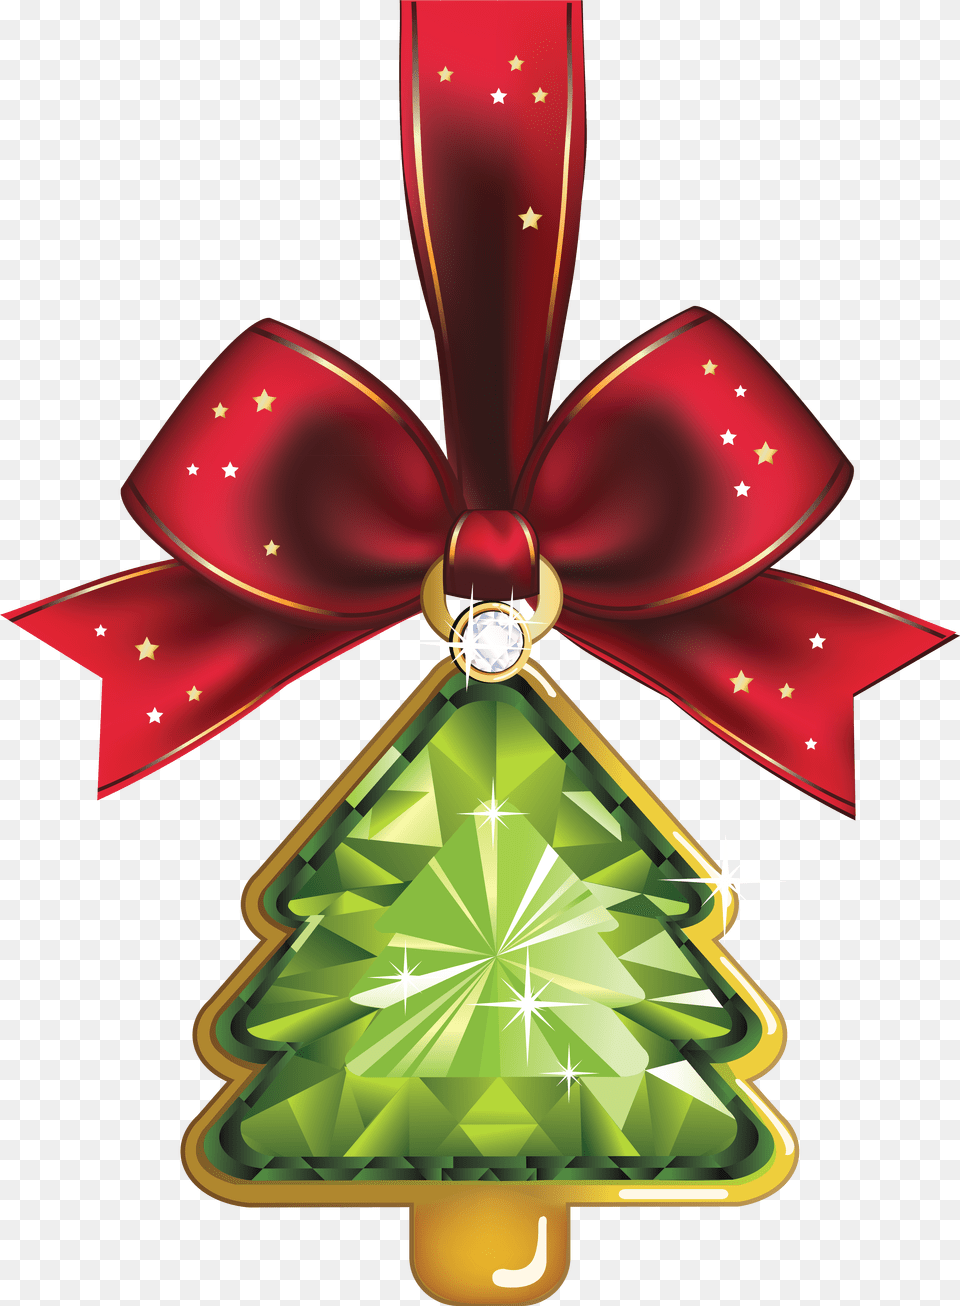 Transparent Hanging Christmas Ornaments Christmas Treen Ornament Clip Art, Accessories, Chandelier, Lamp Png